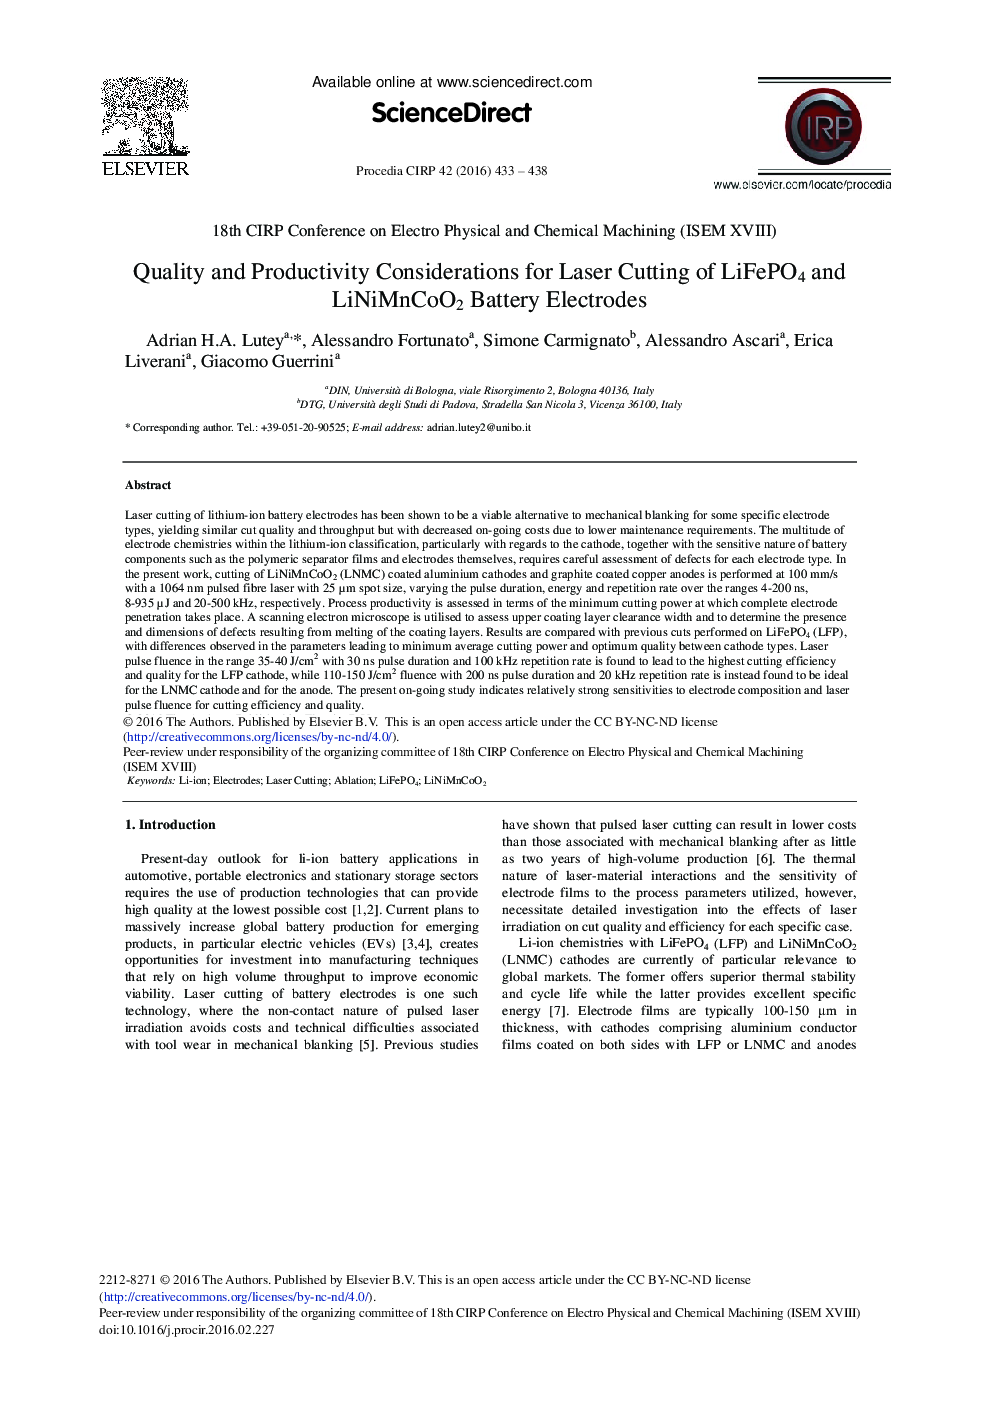 Quality and Productivity Considerations for Laser Cutting of LiFePO4 and LiNiMnCoO2 Battery Electrodes 